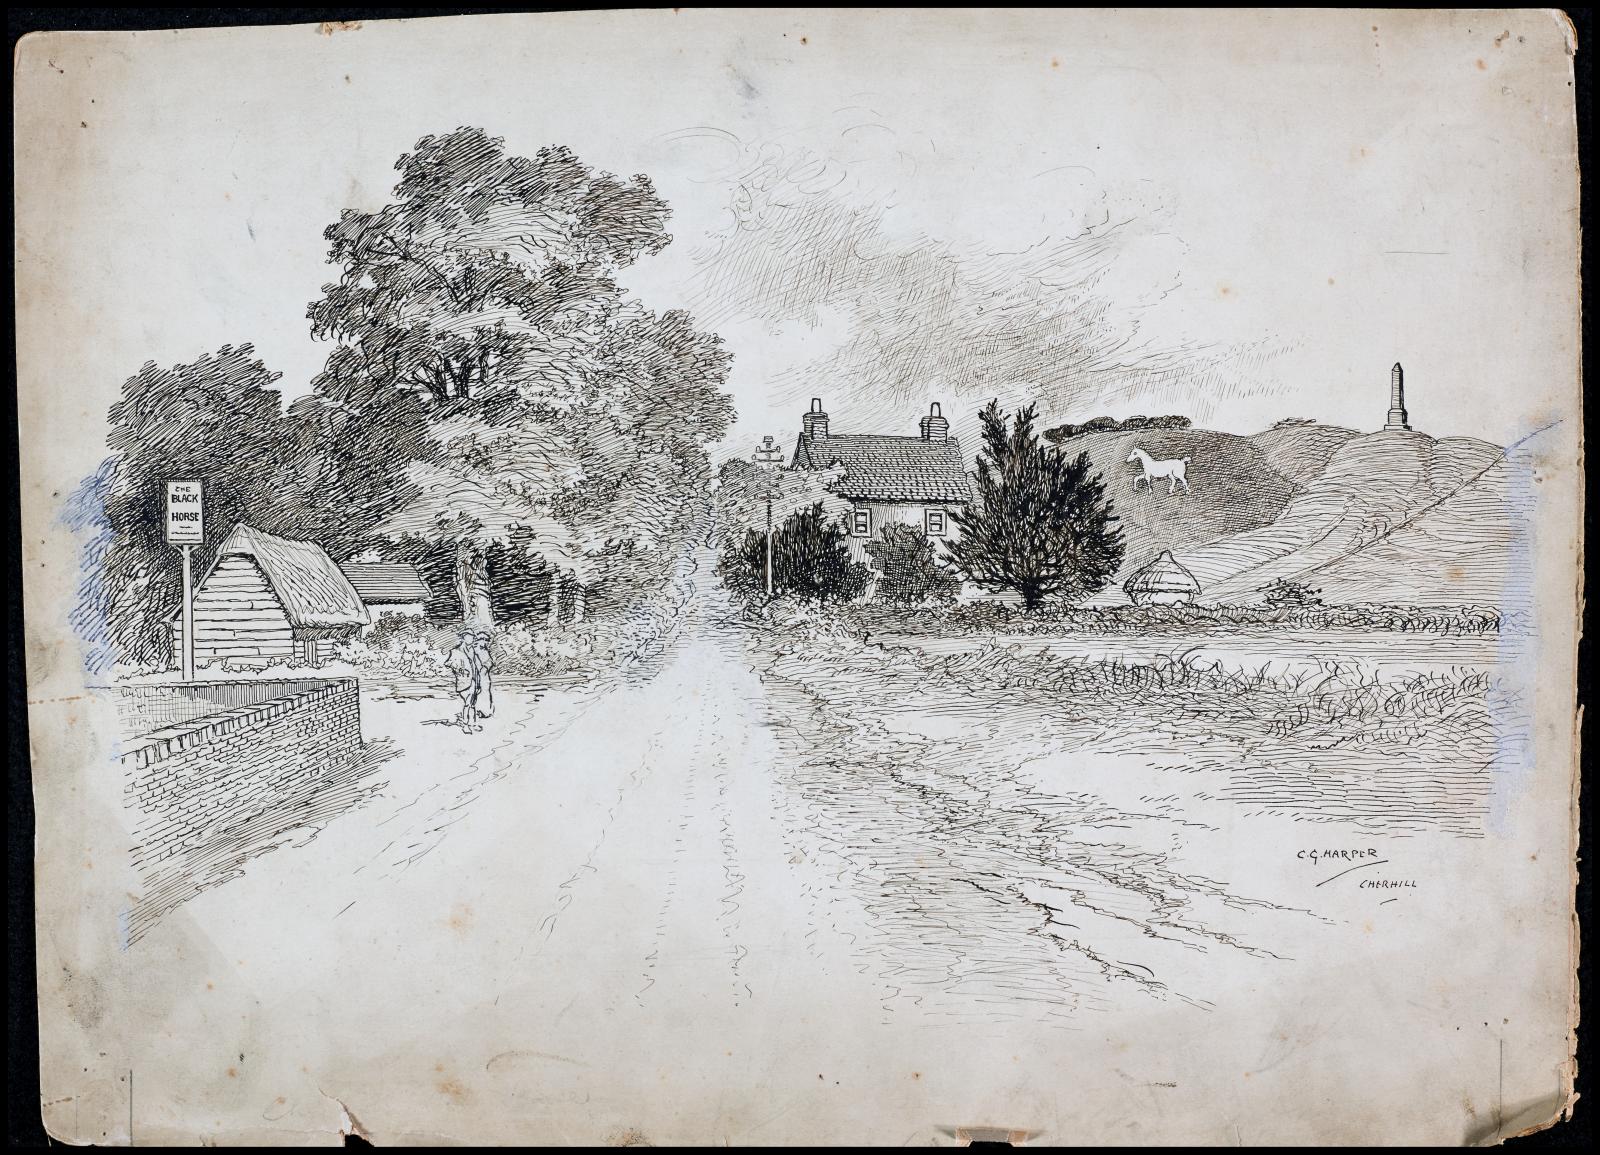 Line-drawn archive illustration showing a lane leading into a rural village, with a carved white horse and an obelisk on the hills beyond.